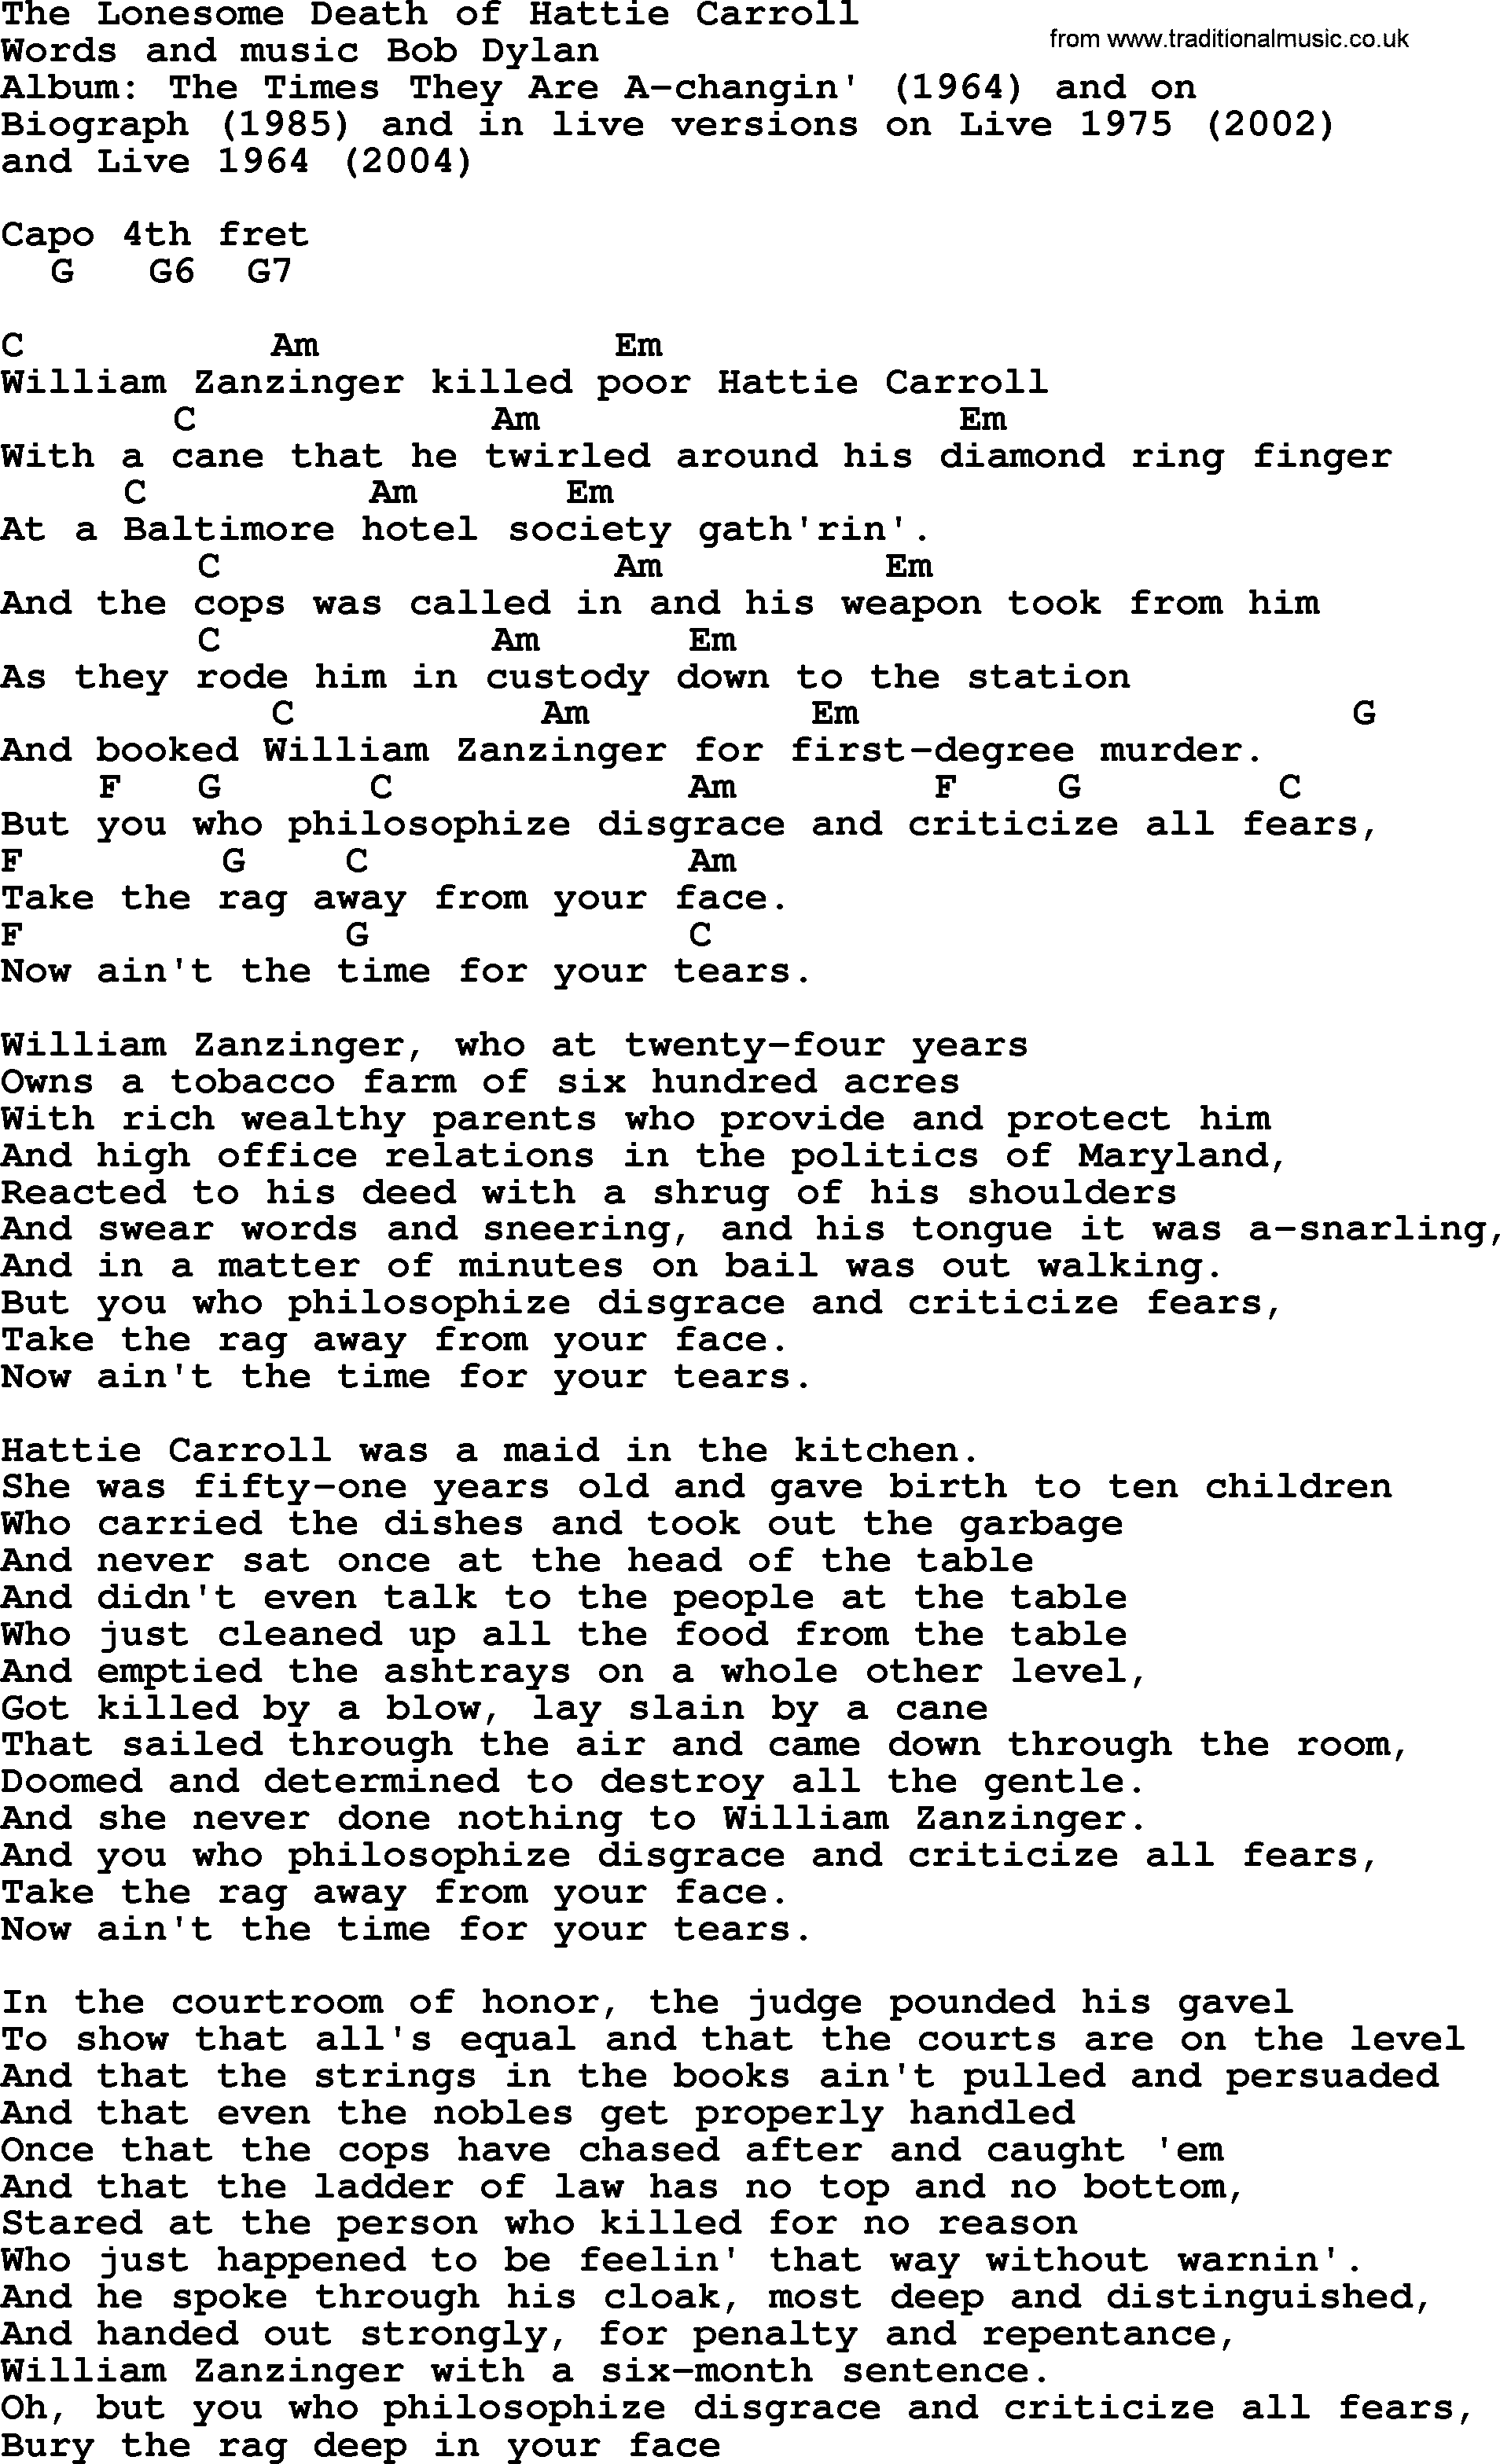 Bob Dylan song, lyrics with chords - The Lonesome Death of Hattie Carroll